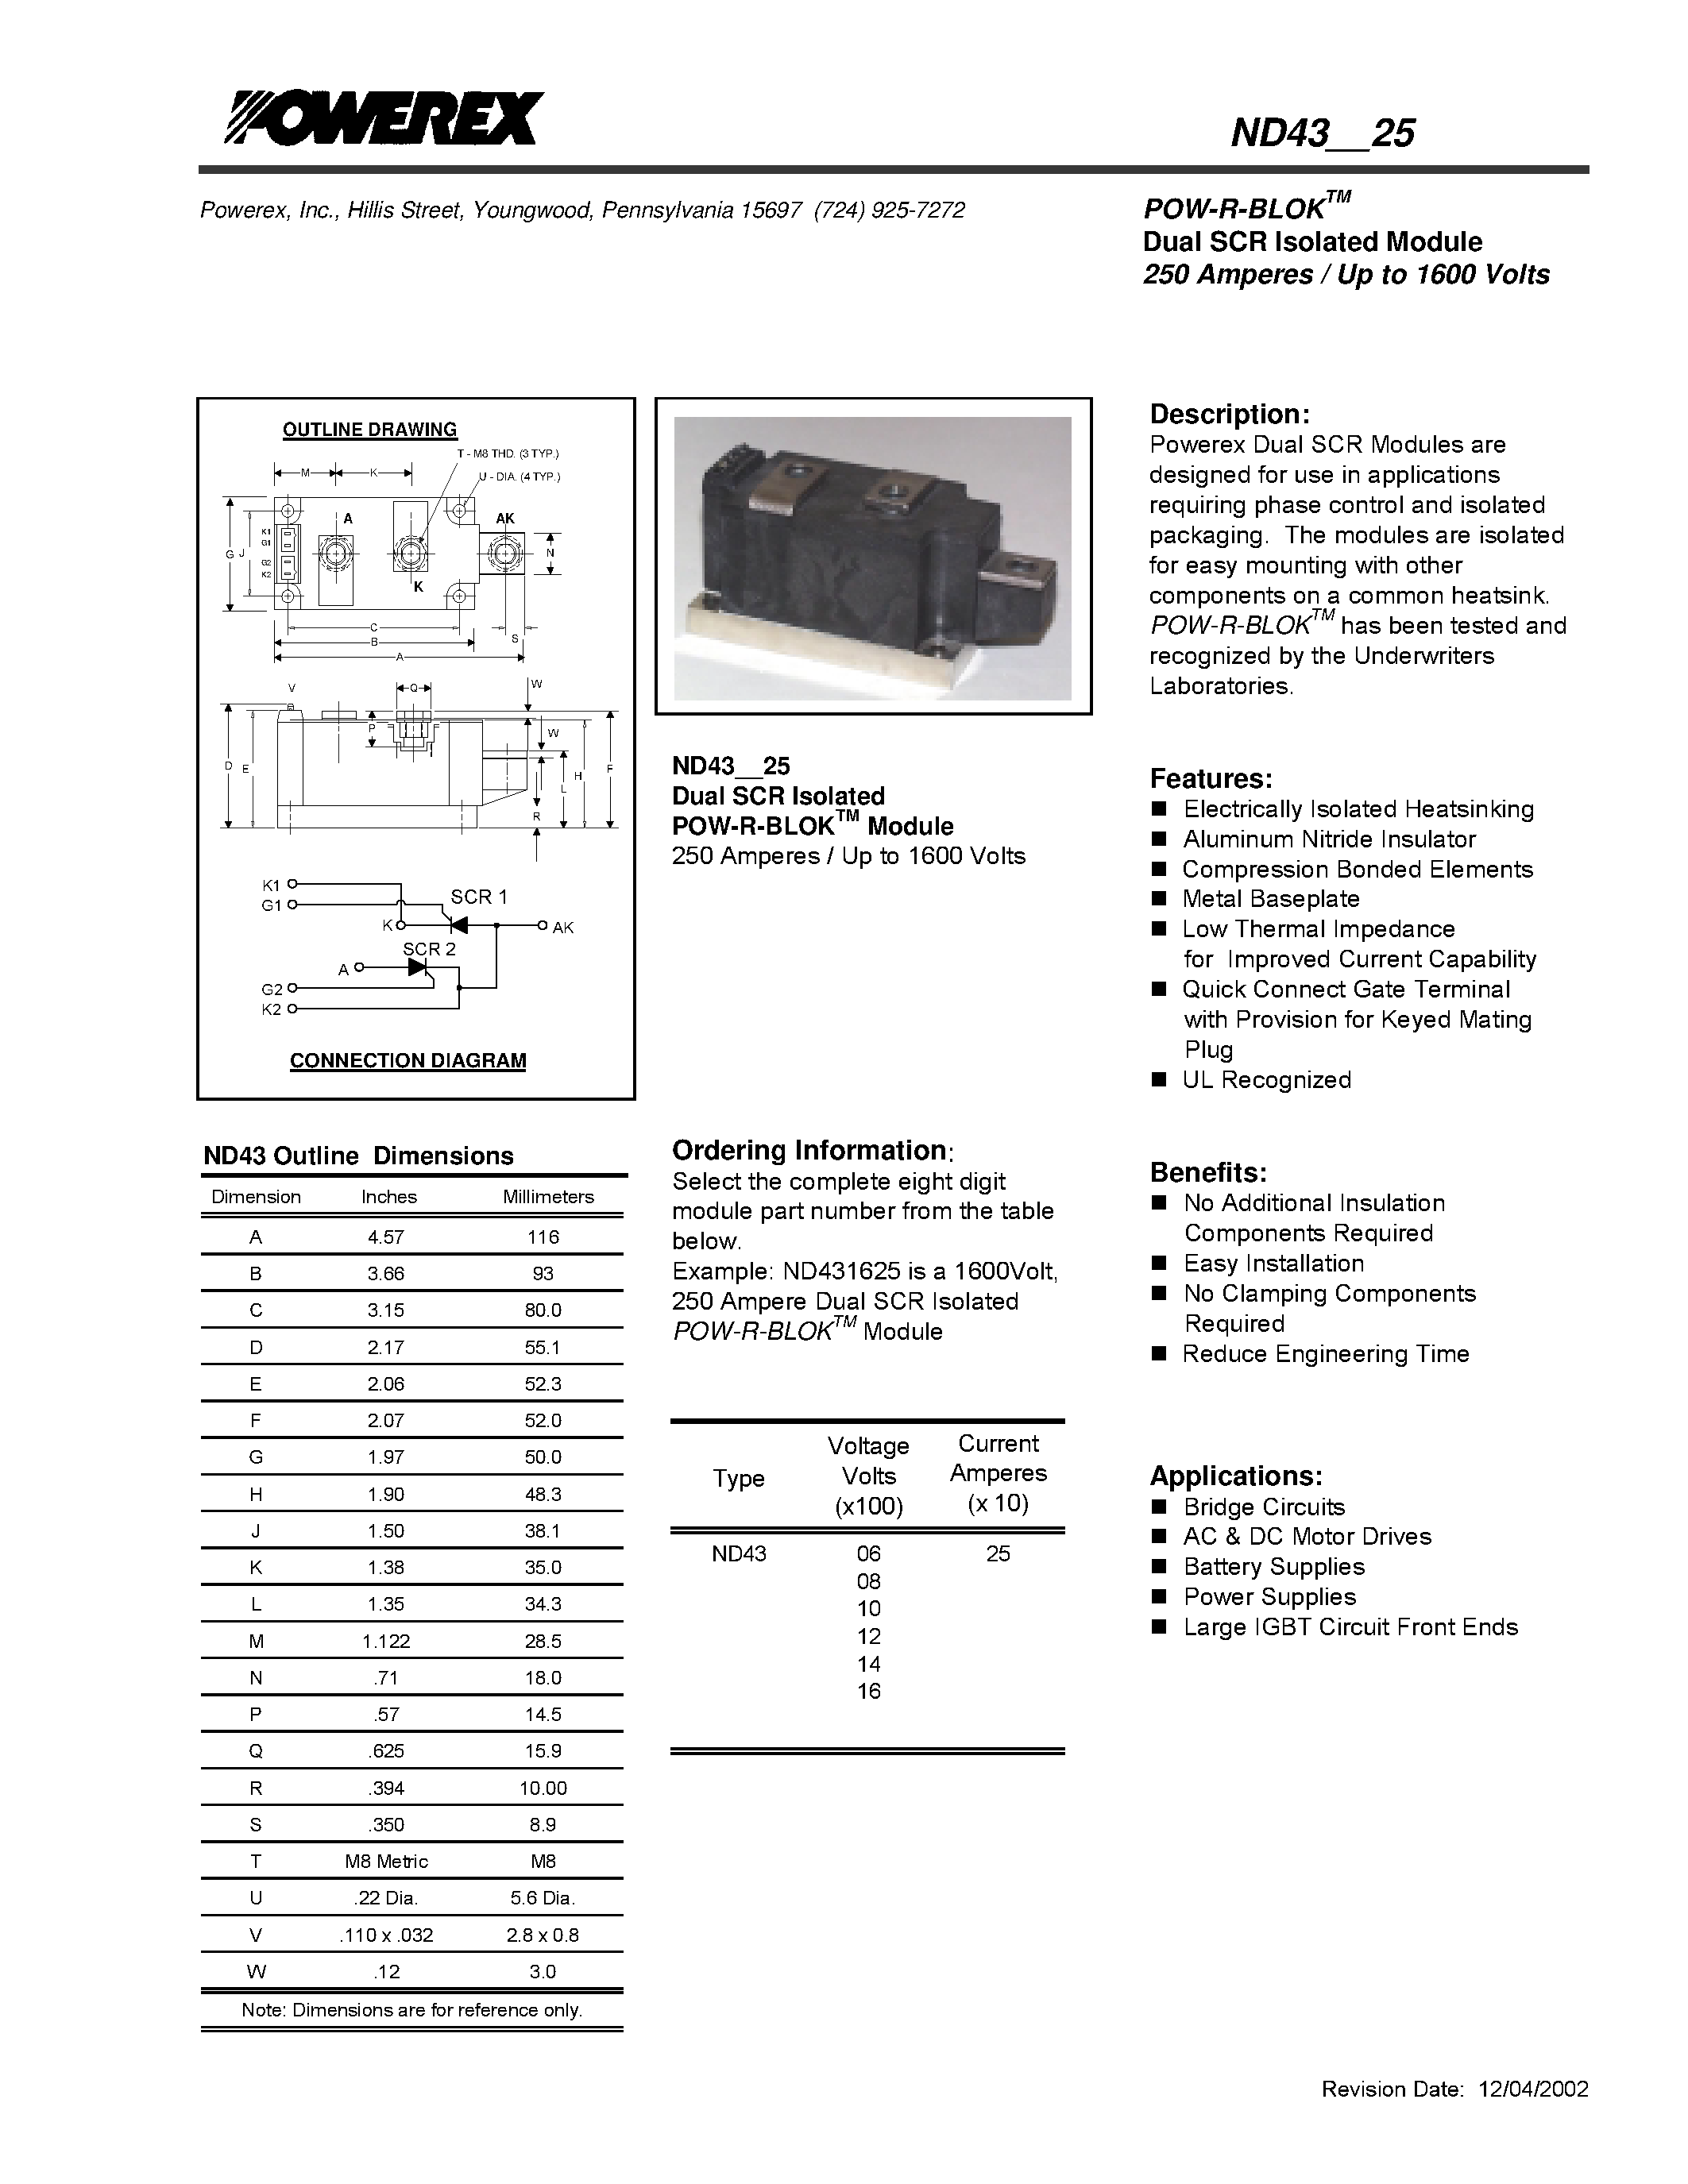 Datasheet ND430625 - POW-R-BLOK Dual SCR Isolated Module (250 Amperes / Up to 1600 Volts) page 1